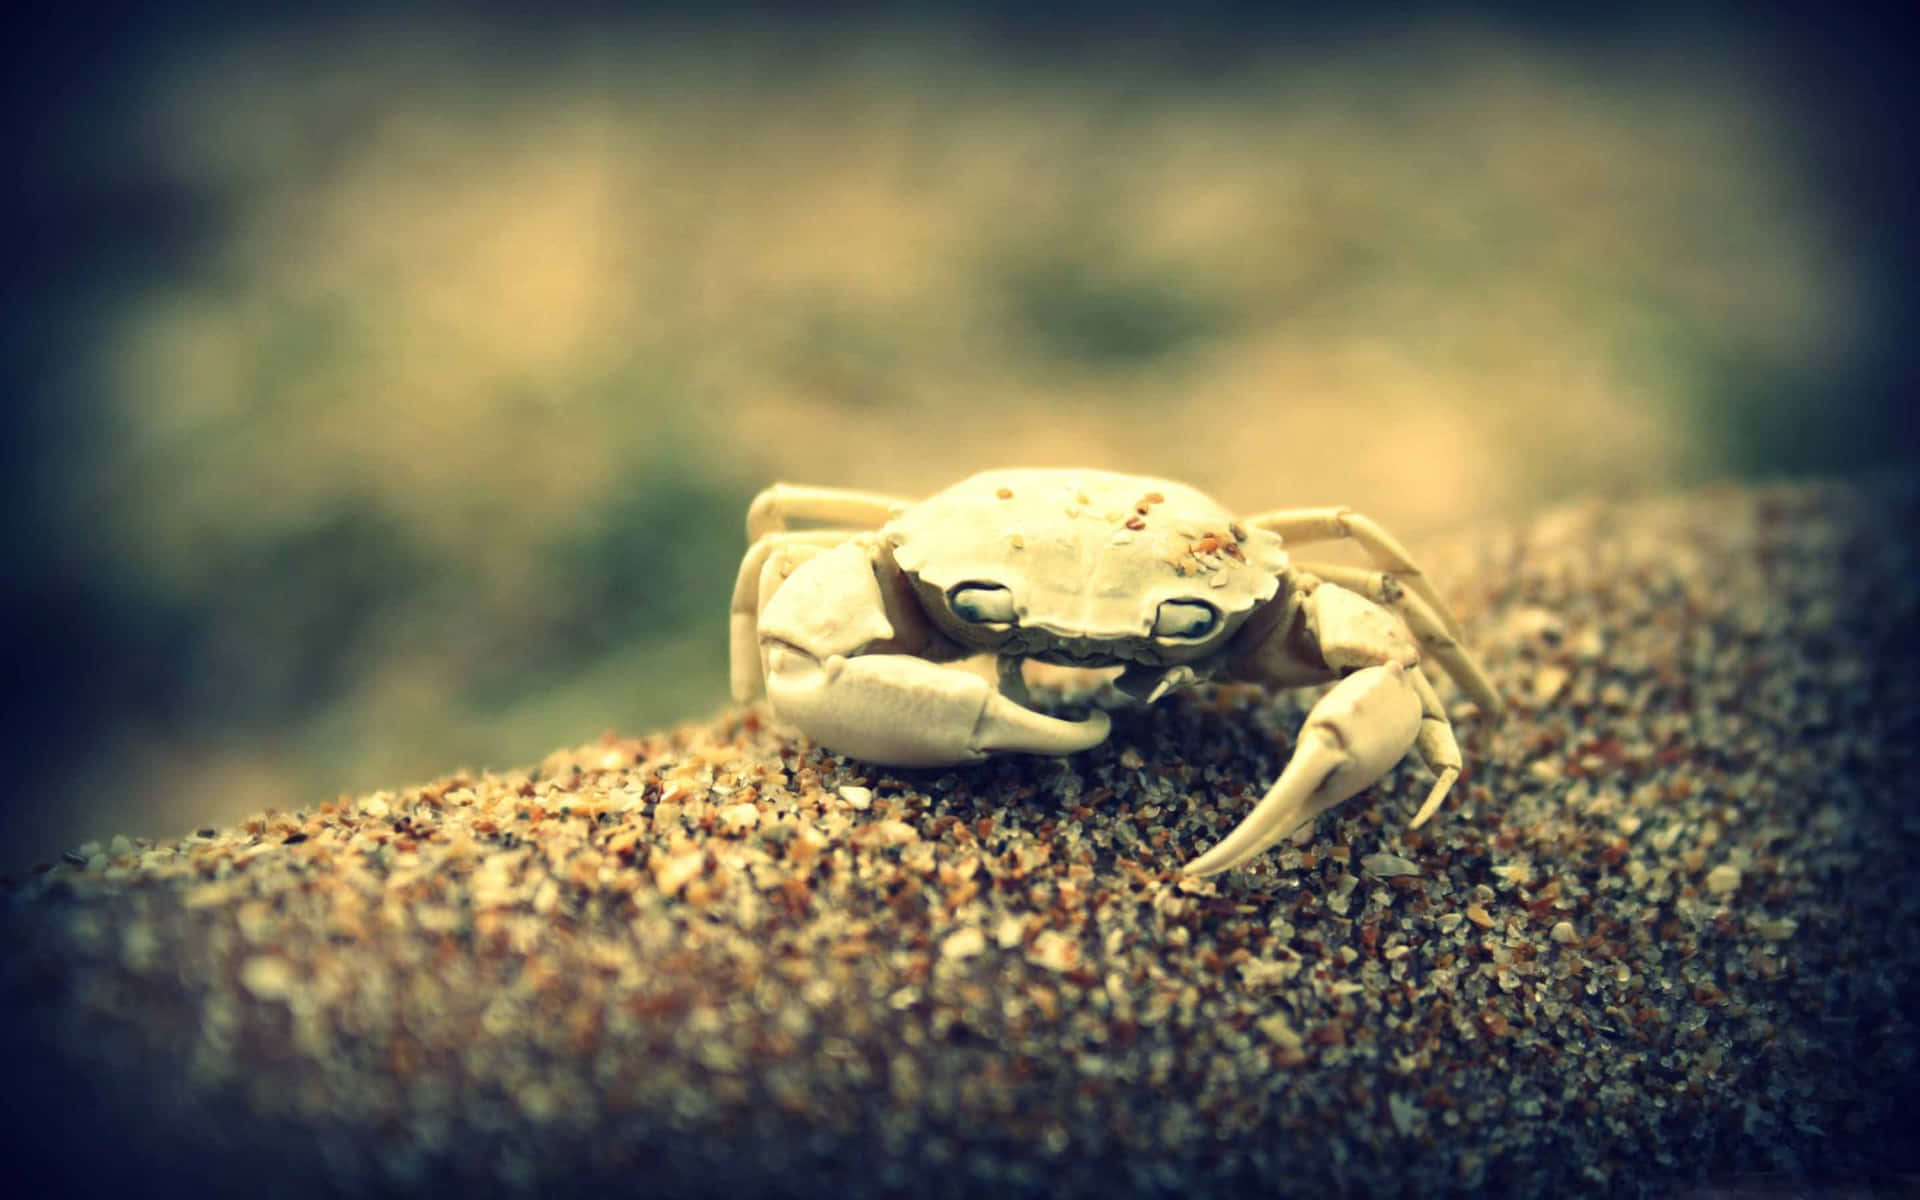 A Robust Crab Crawling in Rock-Filled Waters